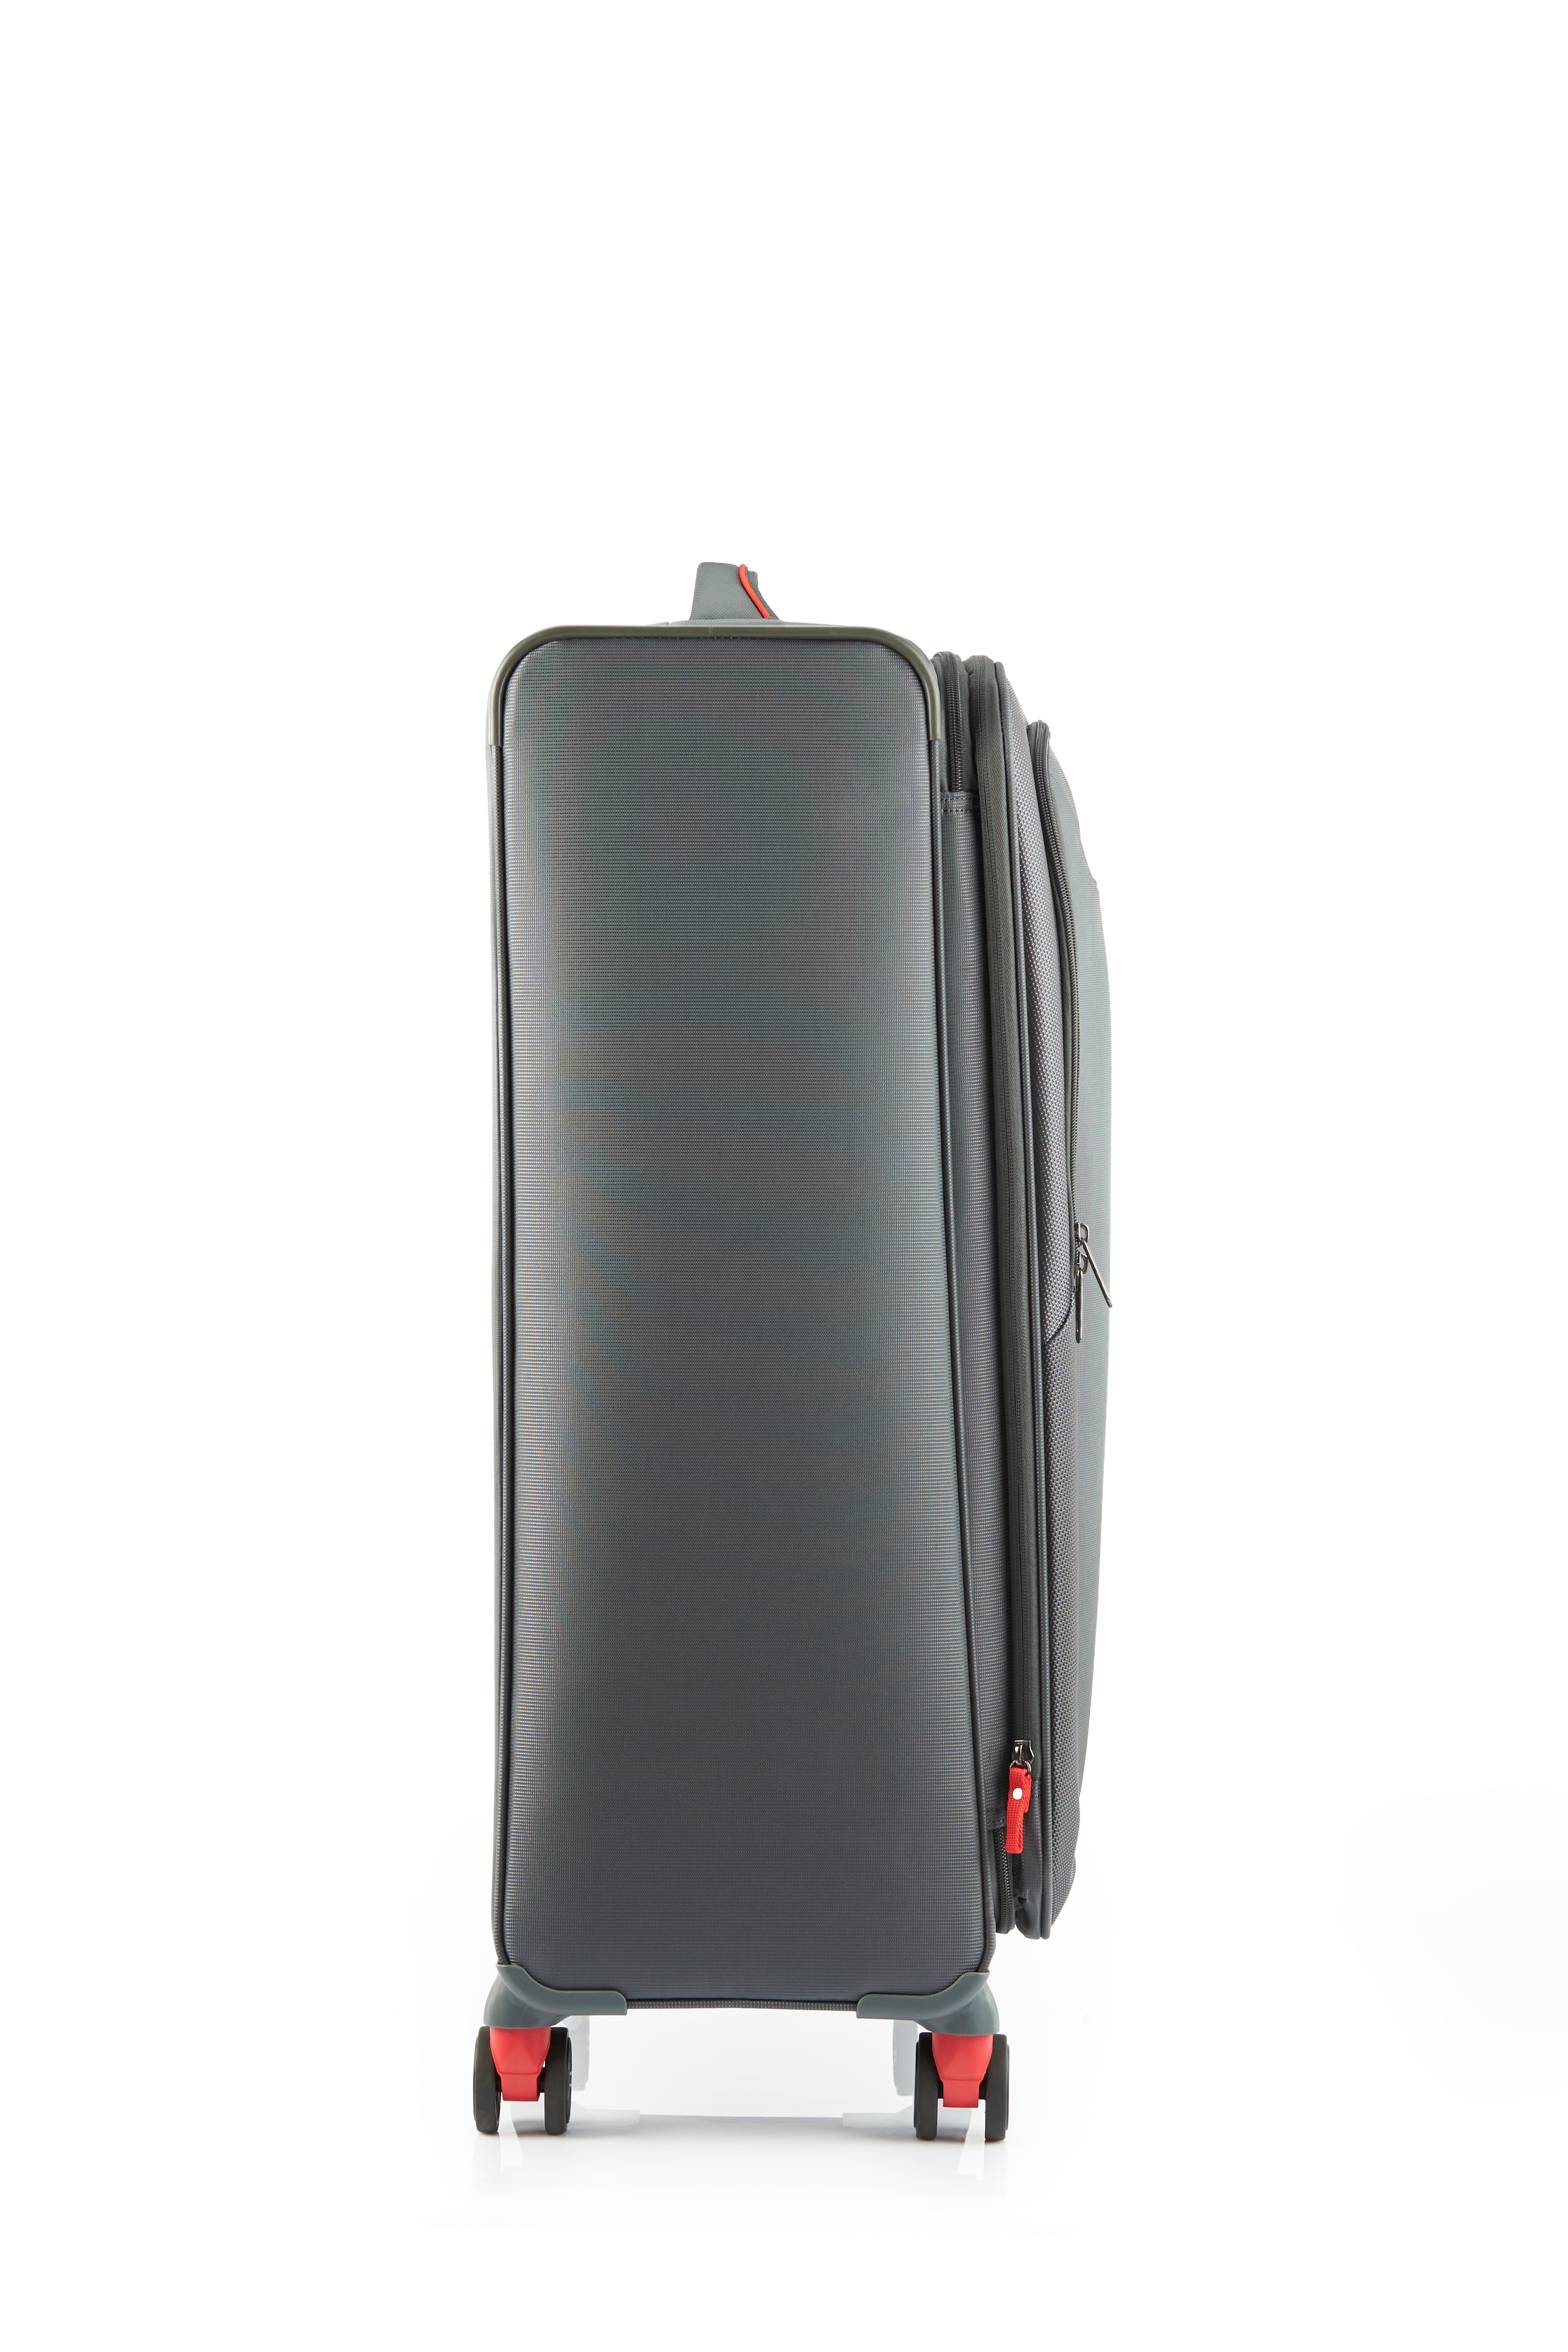 American Tourister - Applite ECO 82cm Large Suitcase - Grey/Red-3